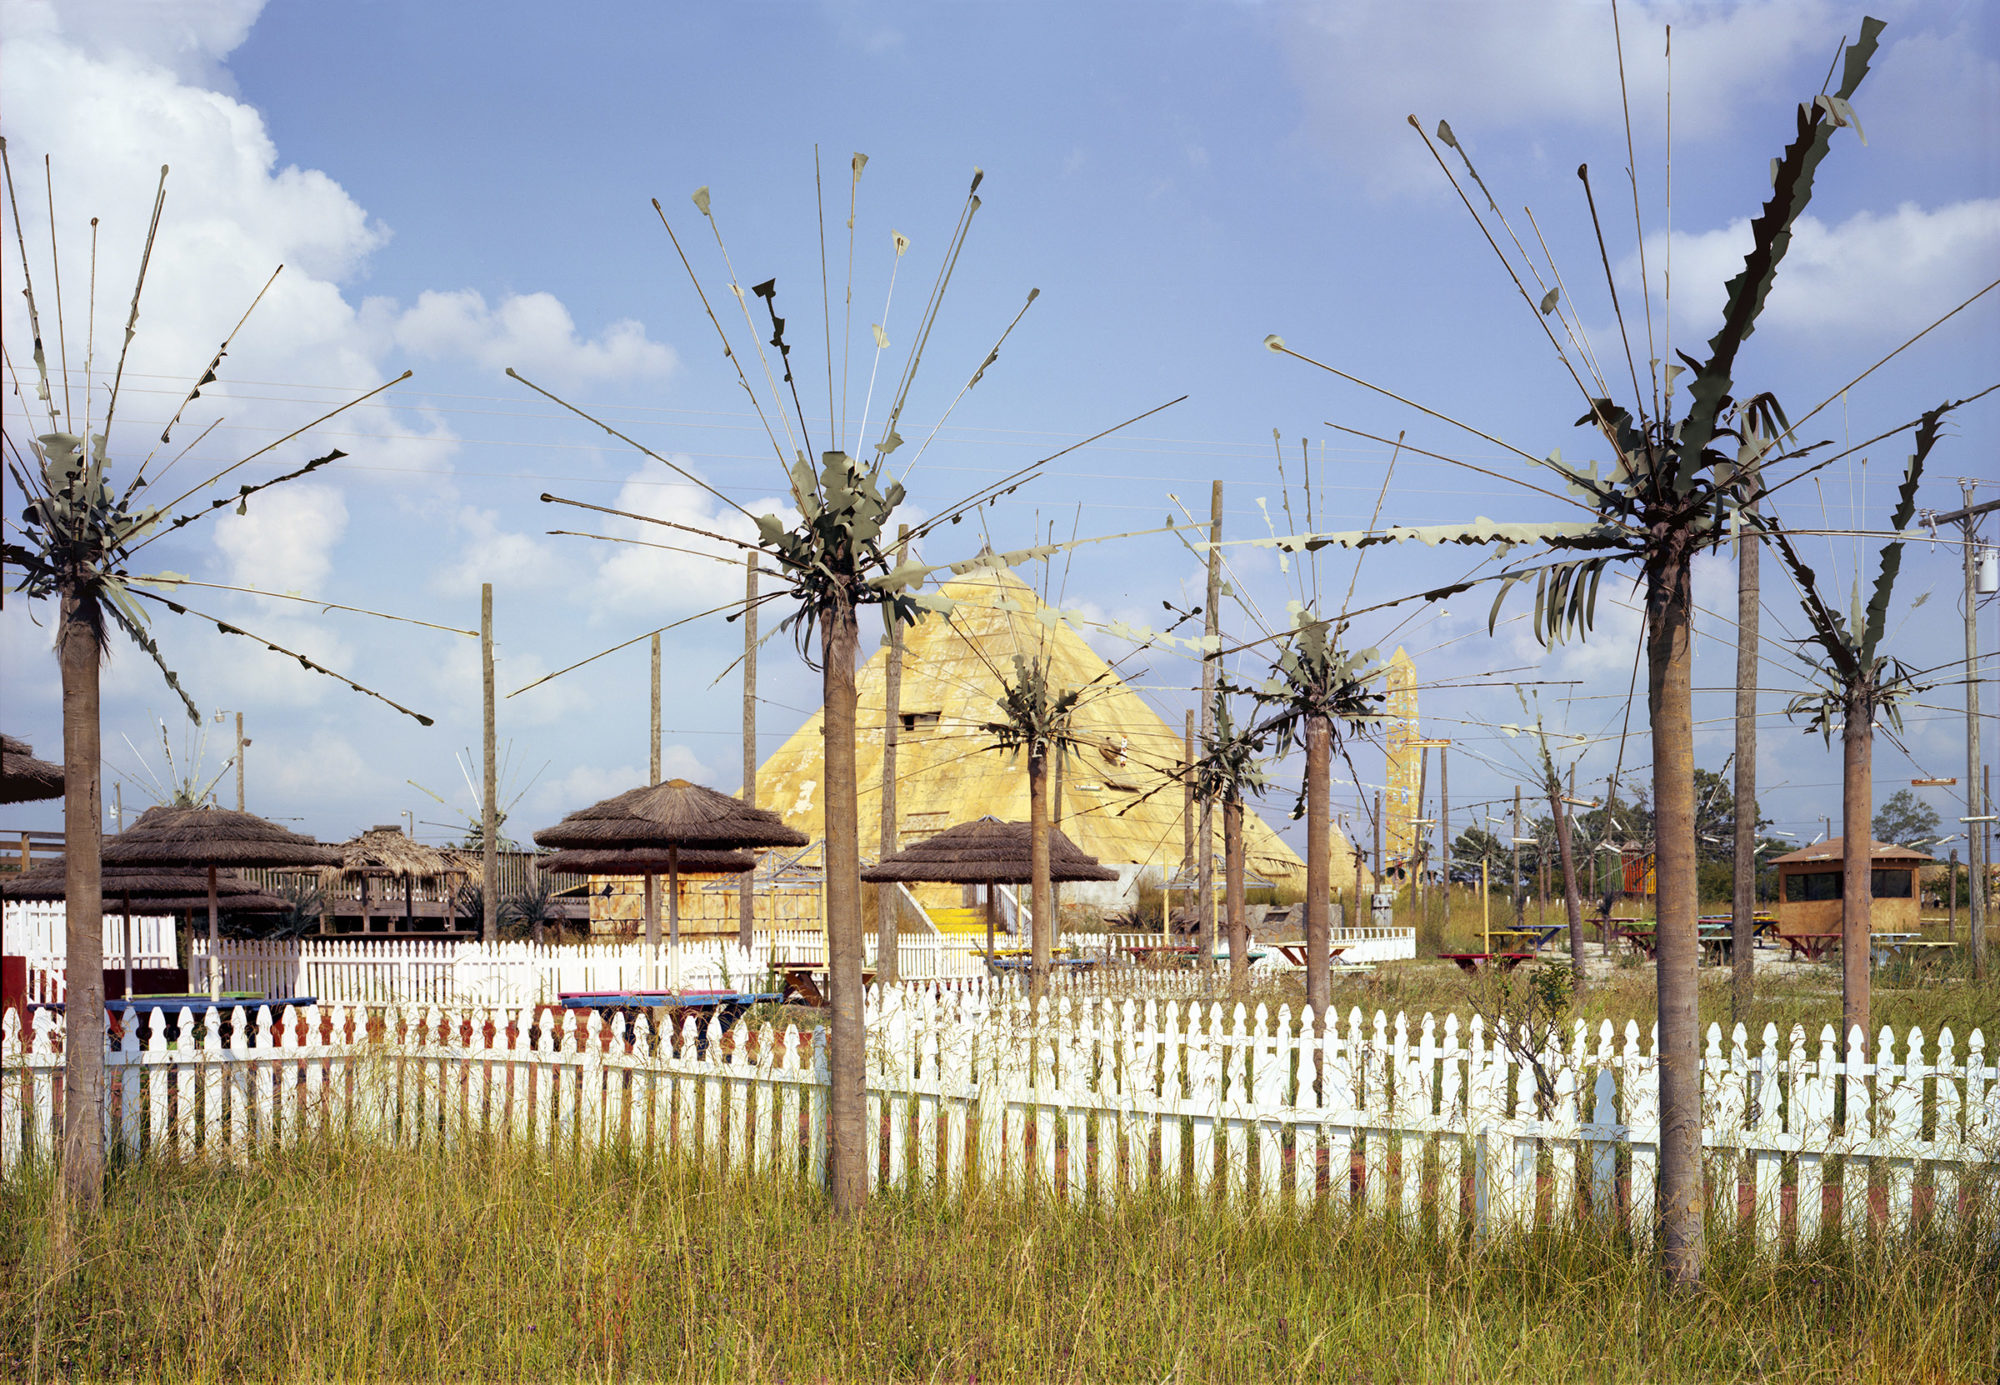 white picket fences sectioning off grassy areas with spiky palm trees and tables with straw umbrellas. in the background: a golden pyramid